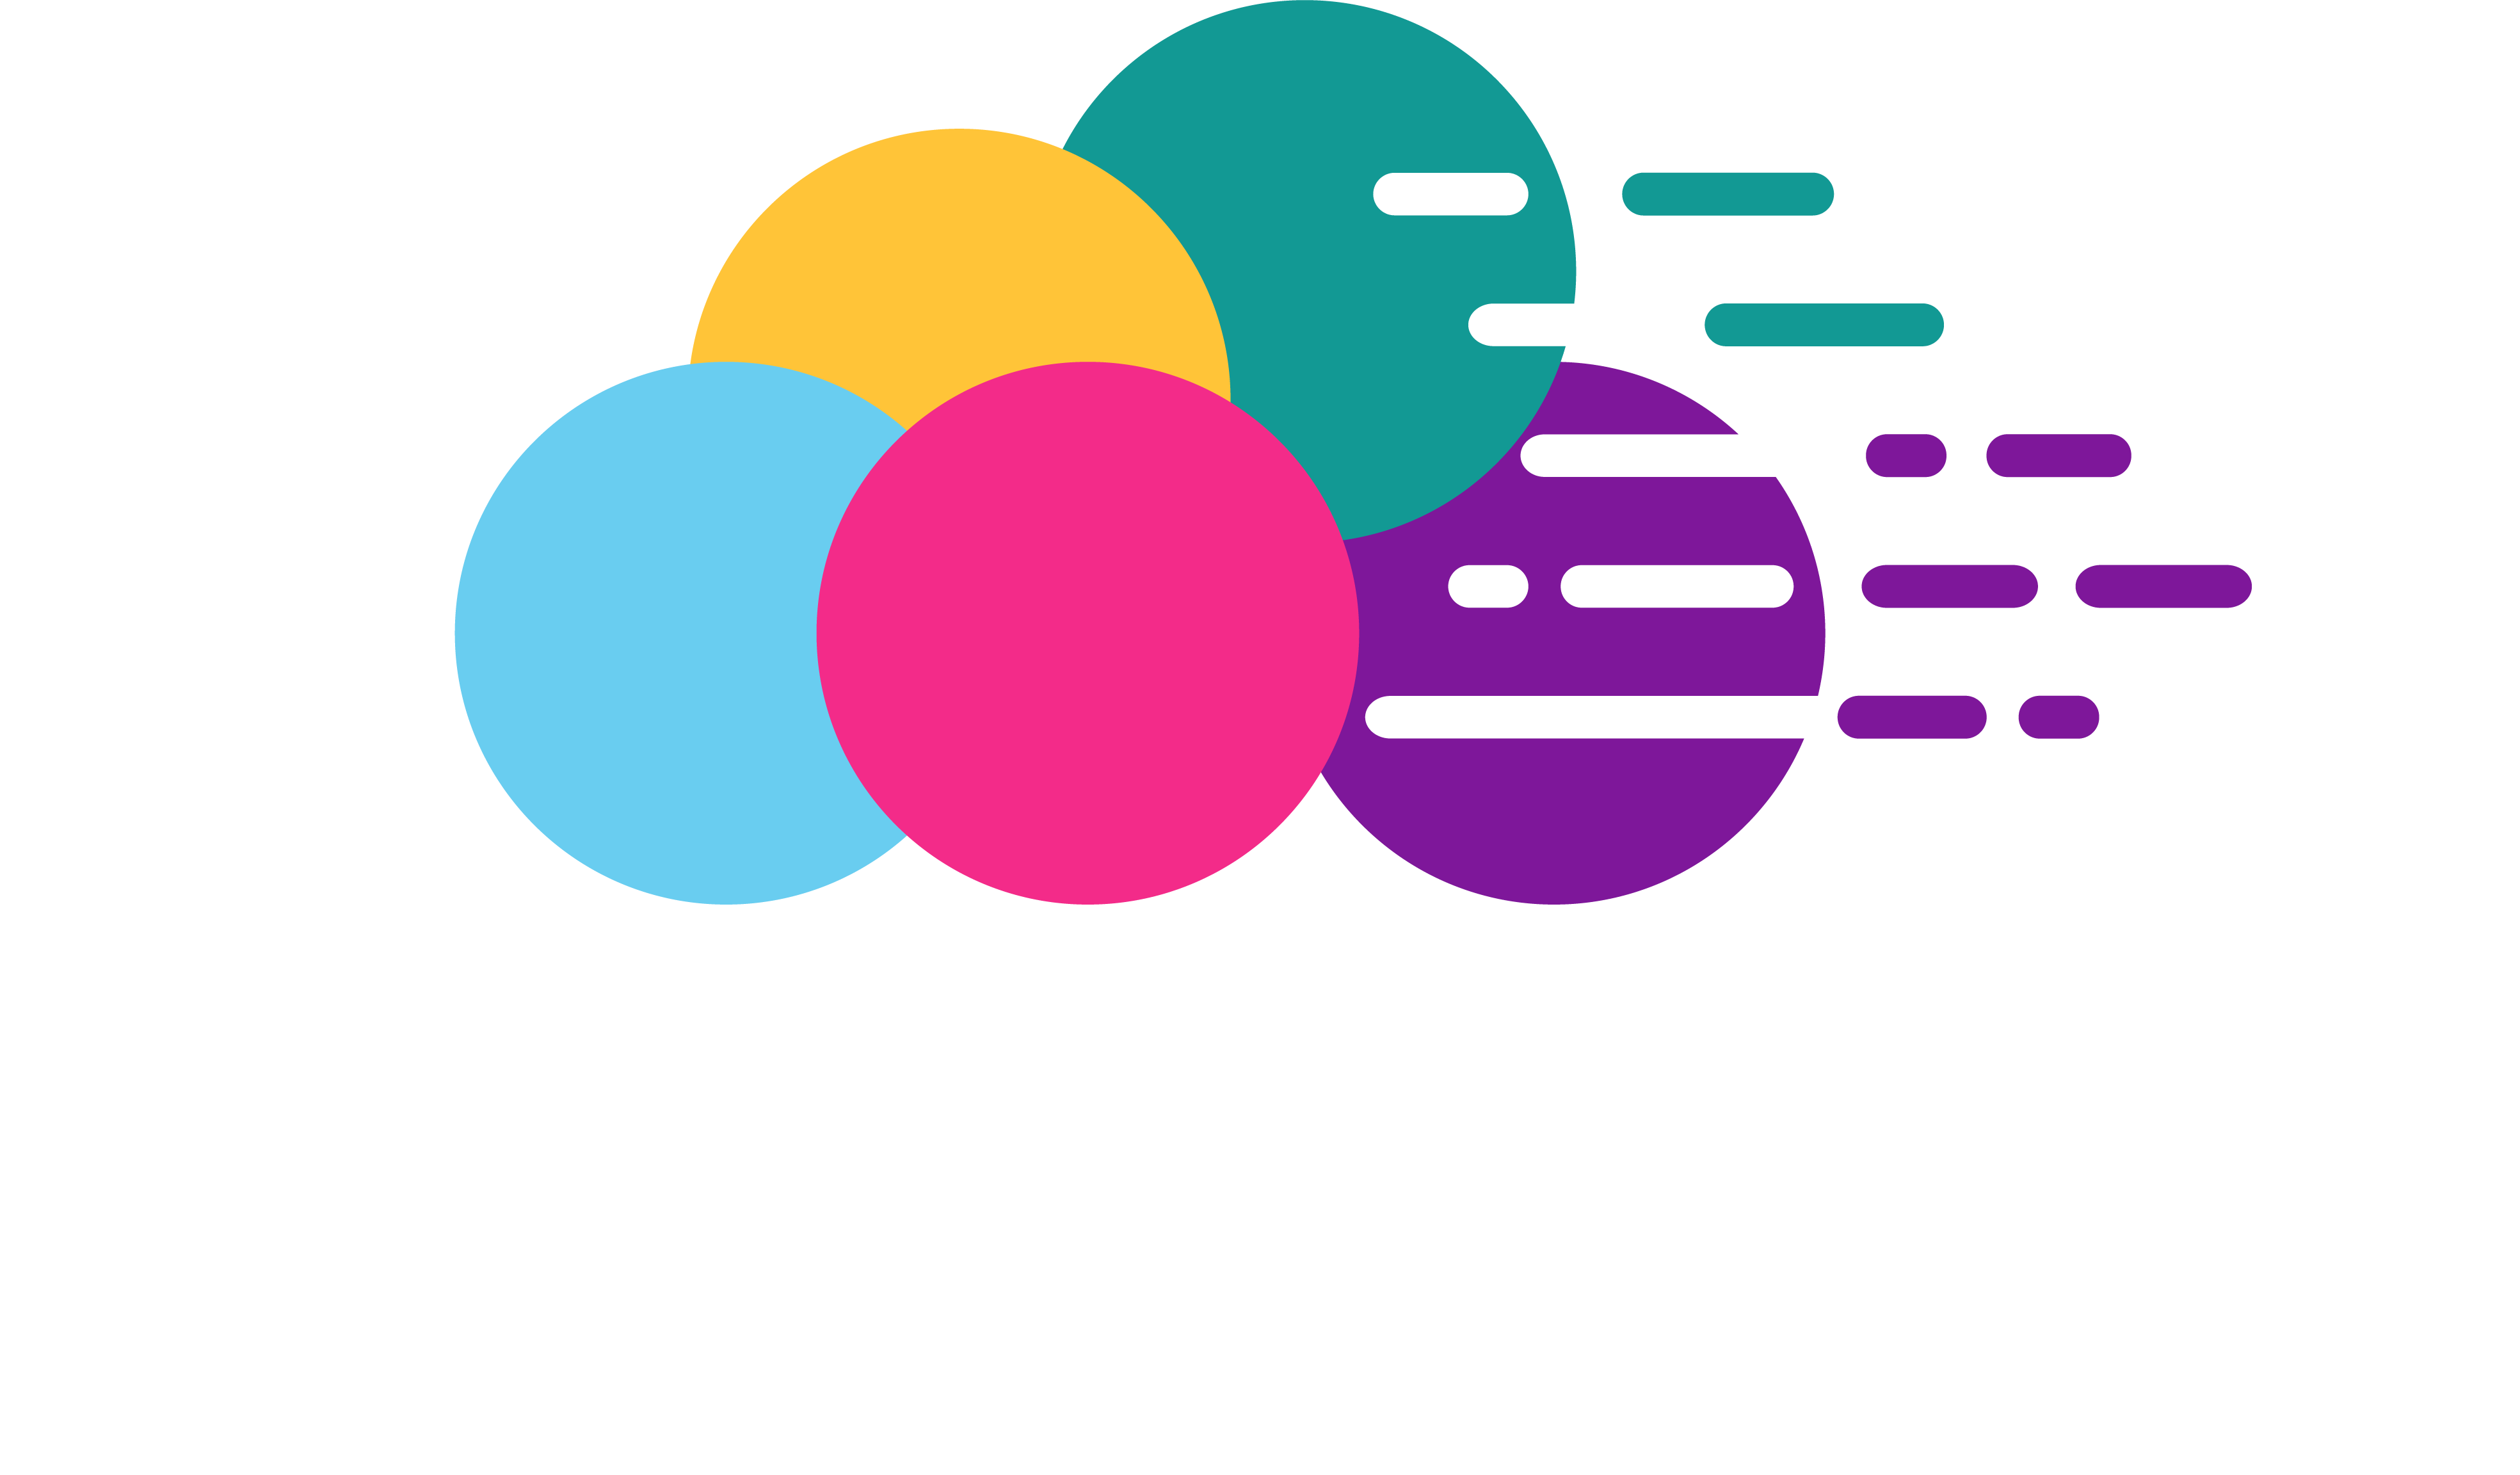 Best Salesforce Implementation Partner In The USA - Cloudy Coders